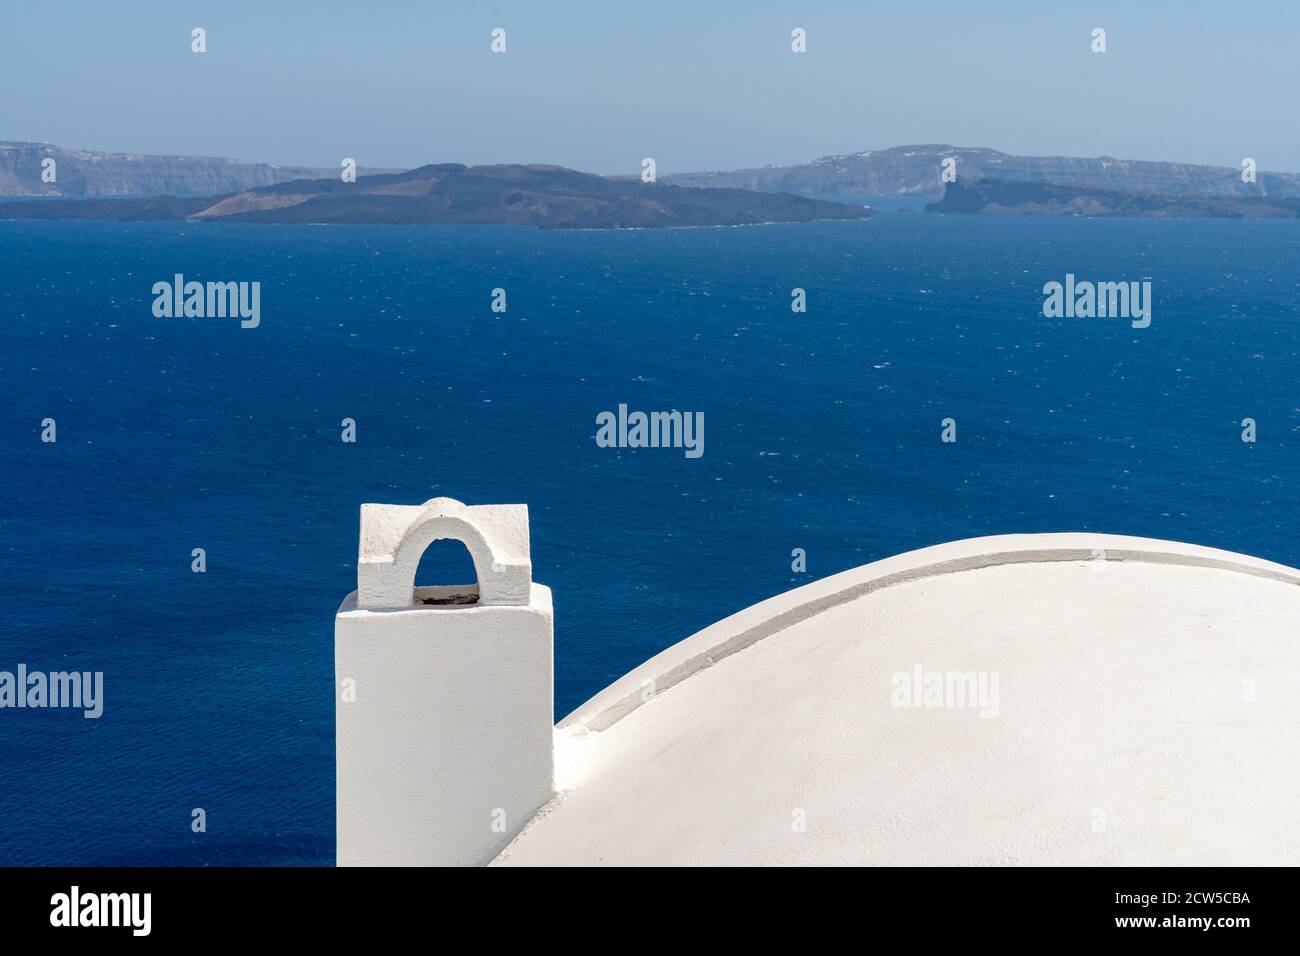 White roof with chimney on the Caldera at Oia, Santorini island, Greece. beautiful blue seascape with volcano in the background Stock Photo